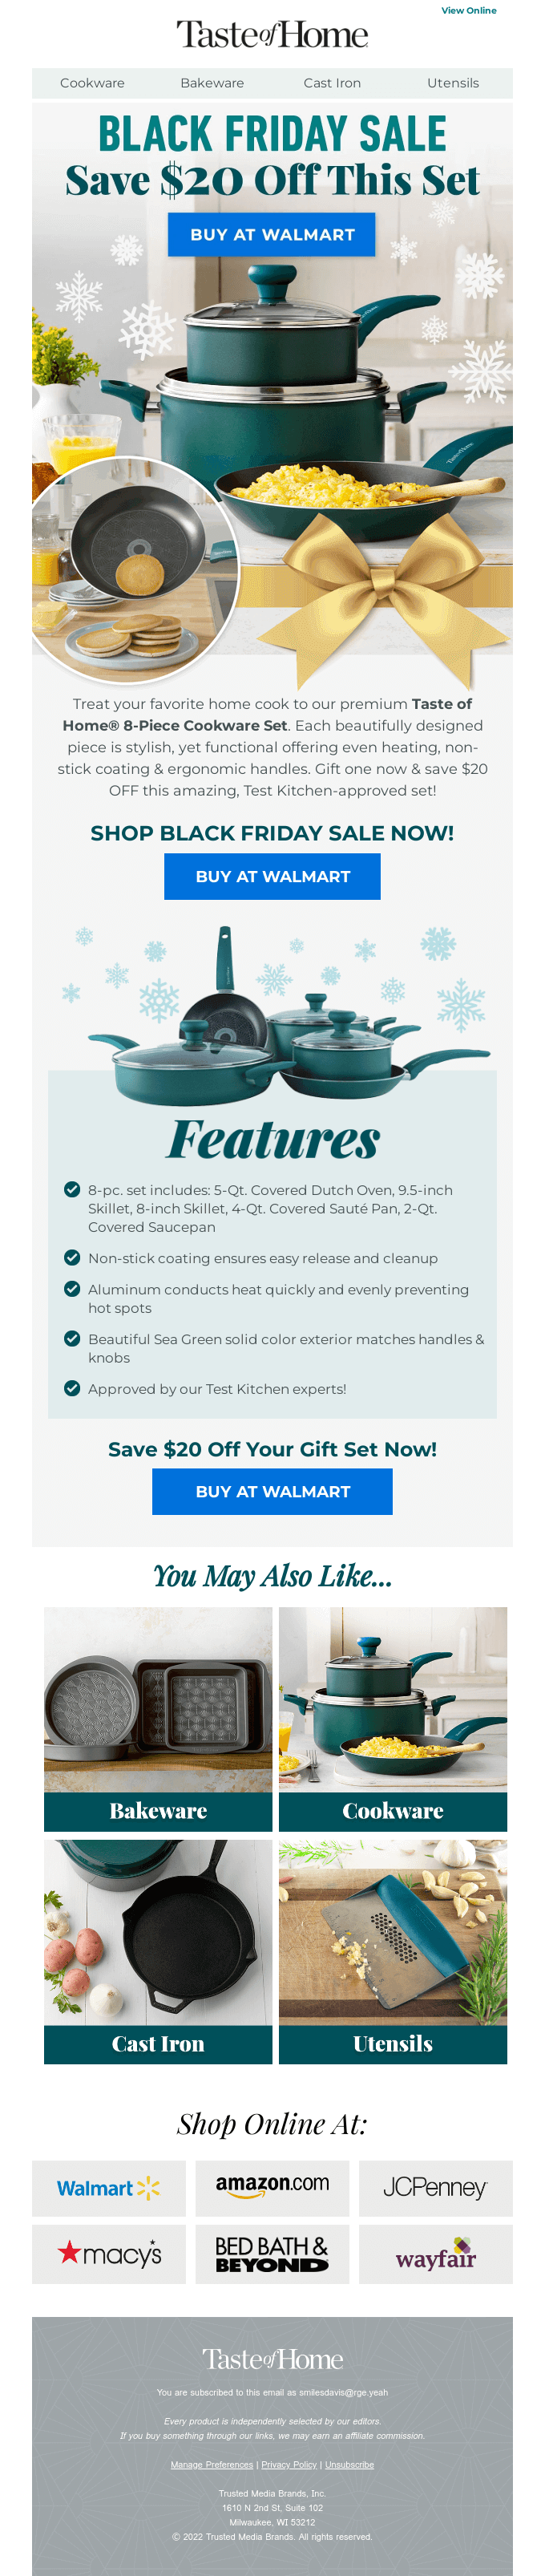 Black Friday Deal: $20 OFF Cookware!